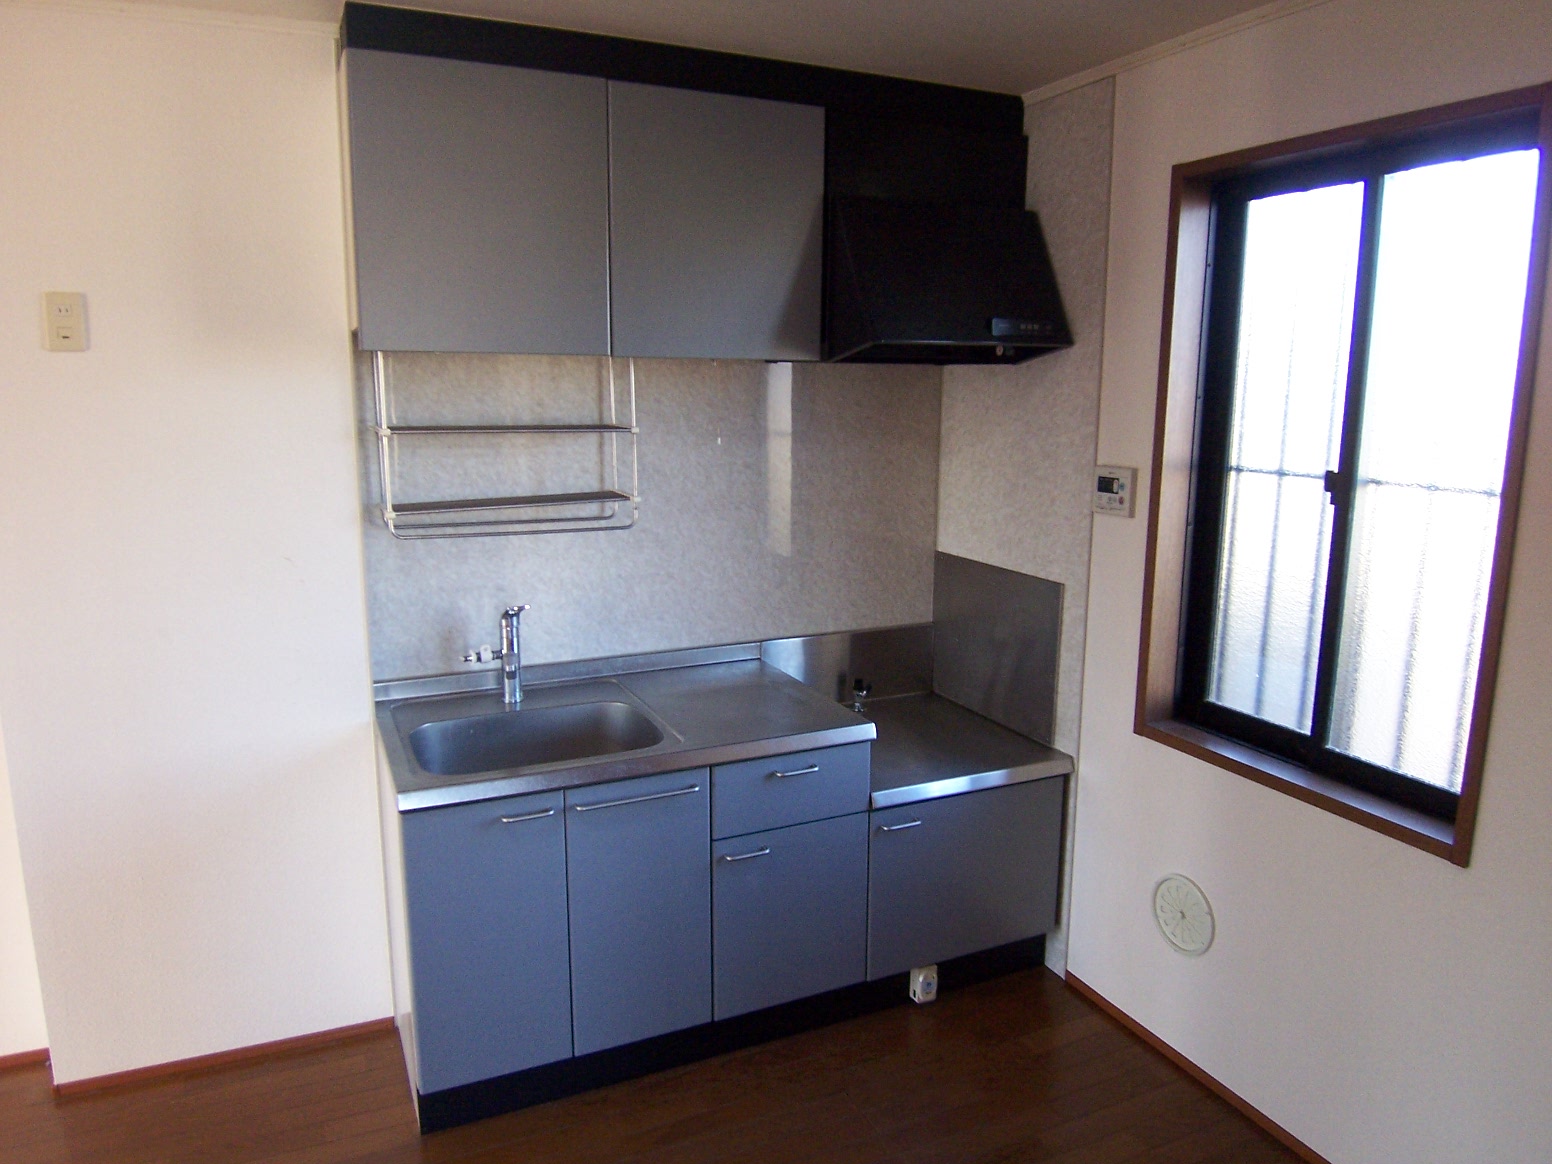 Kitchen. Because with a window, Brightness ・ It is ventilation pat